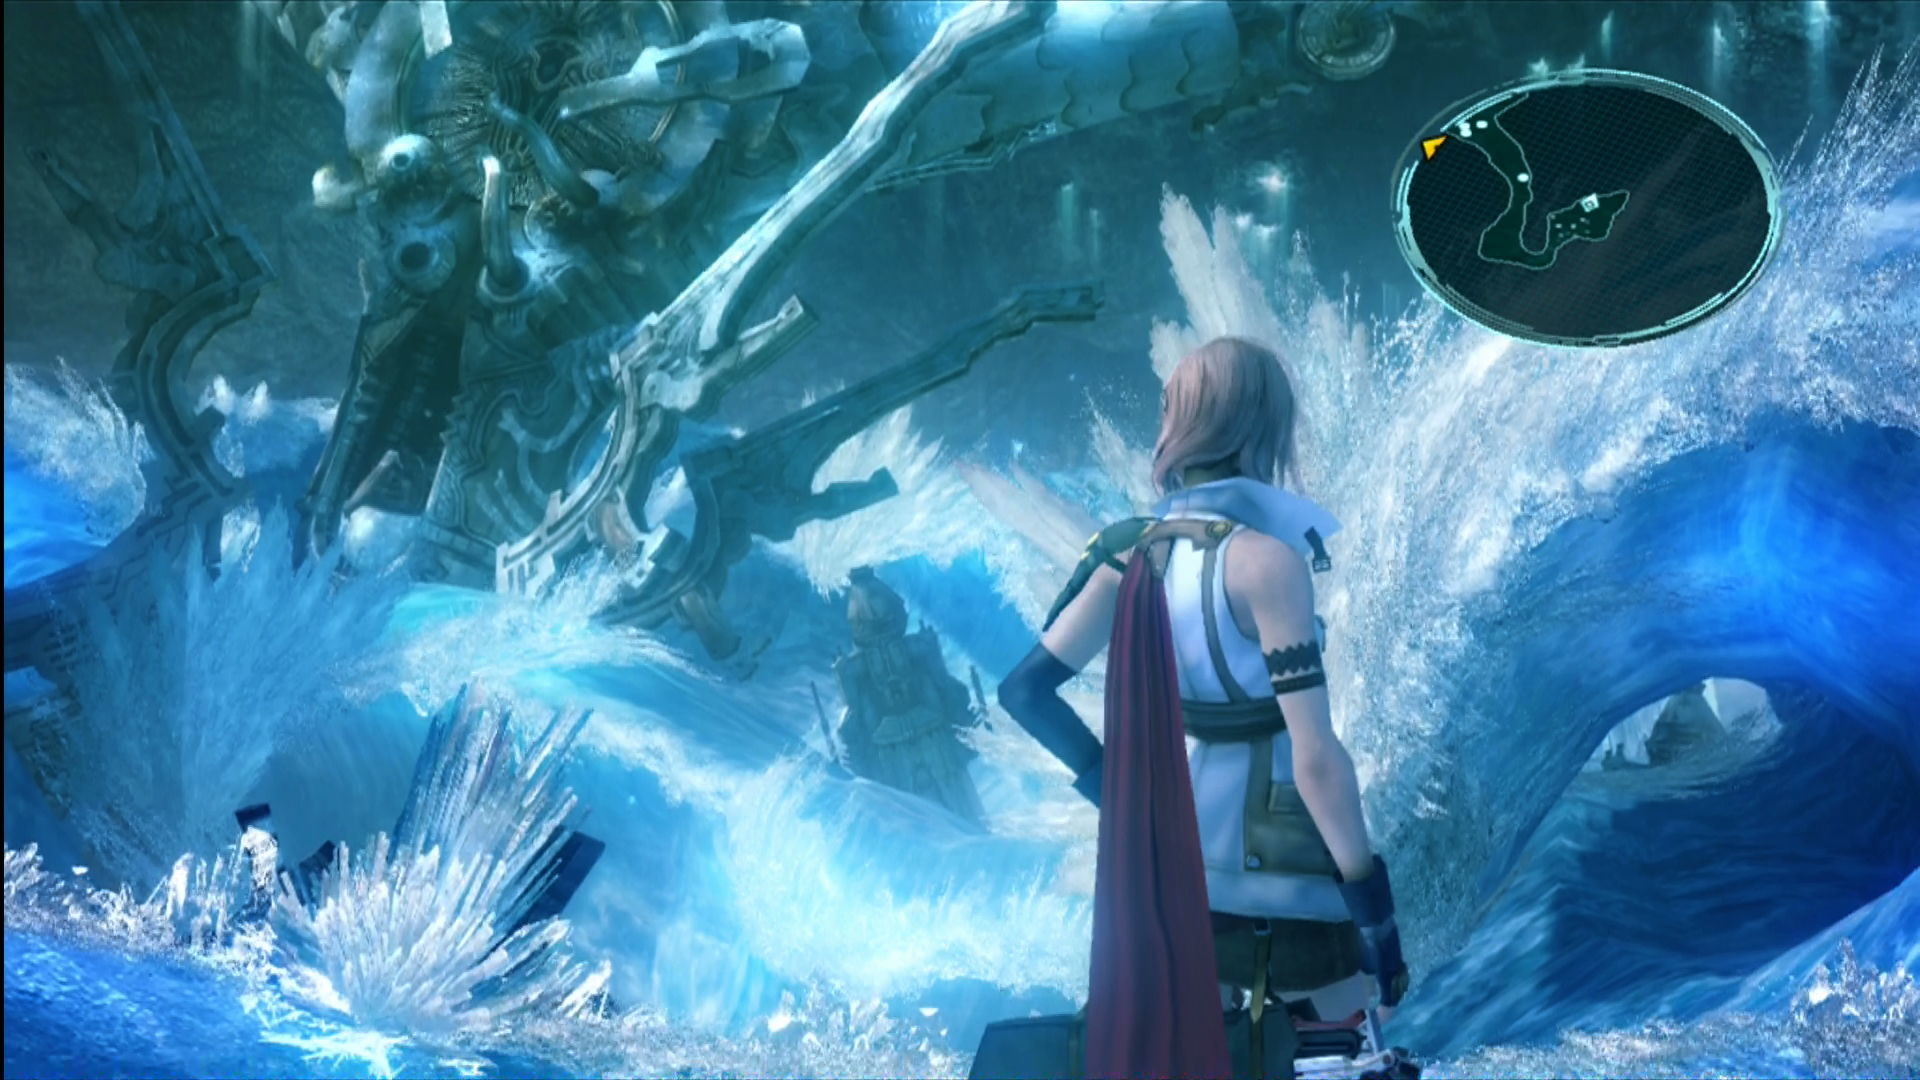 1920x1080 FF going back to the roots with crystals - Final Fantasy XIII-2 Message  Board for PlayStation 3 - Page 3 - GameFAQs